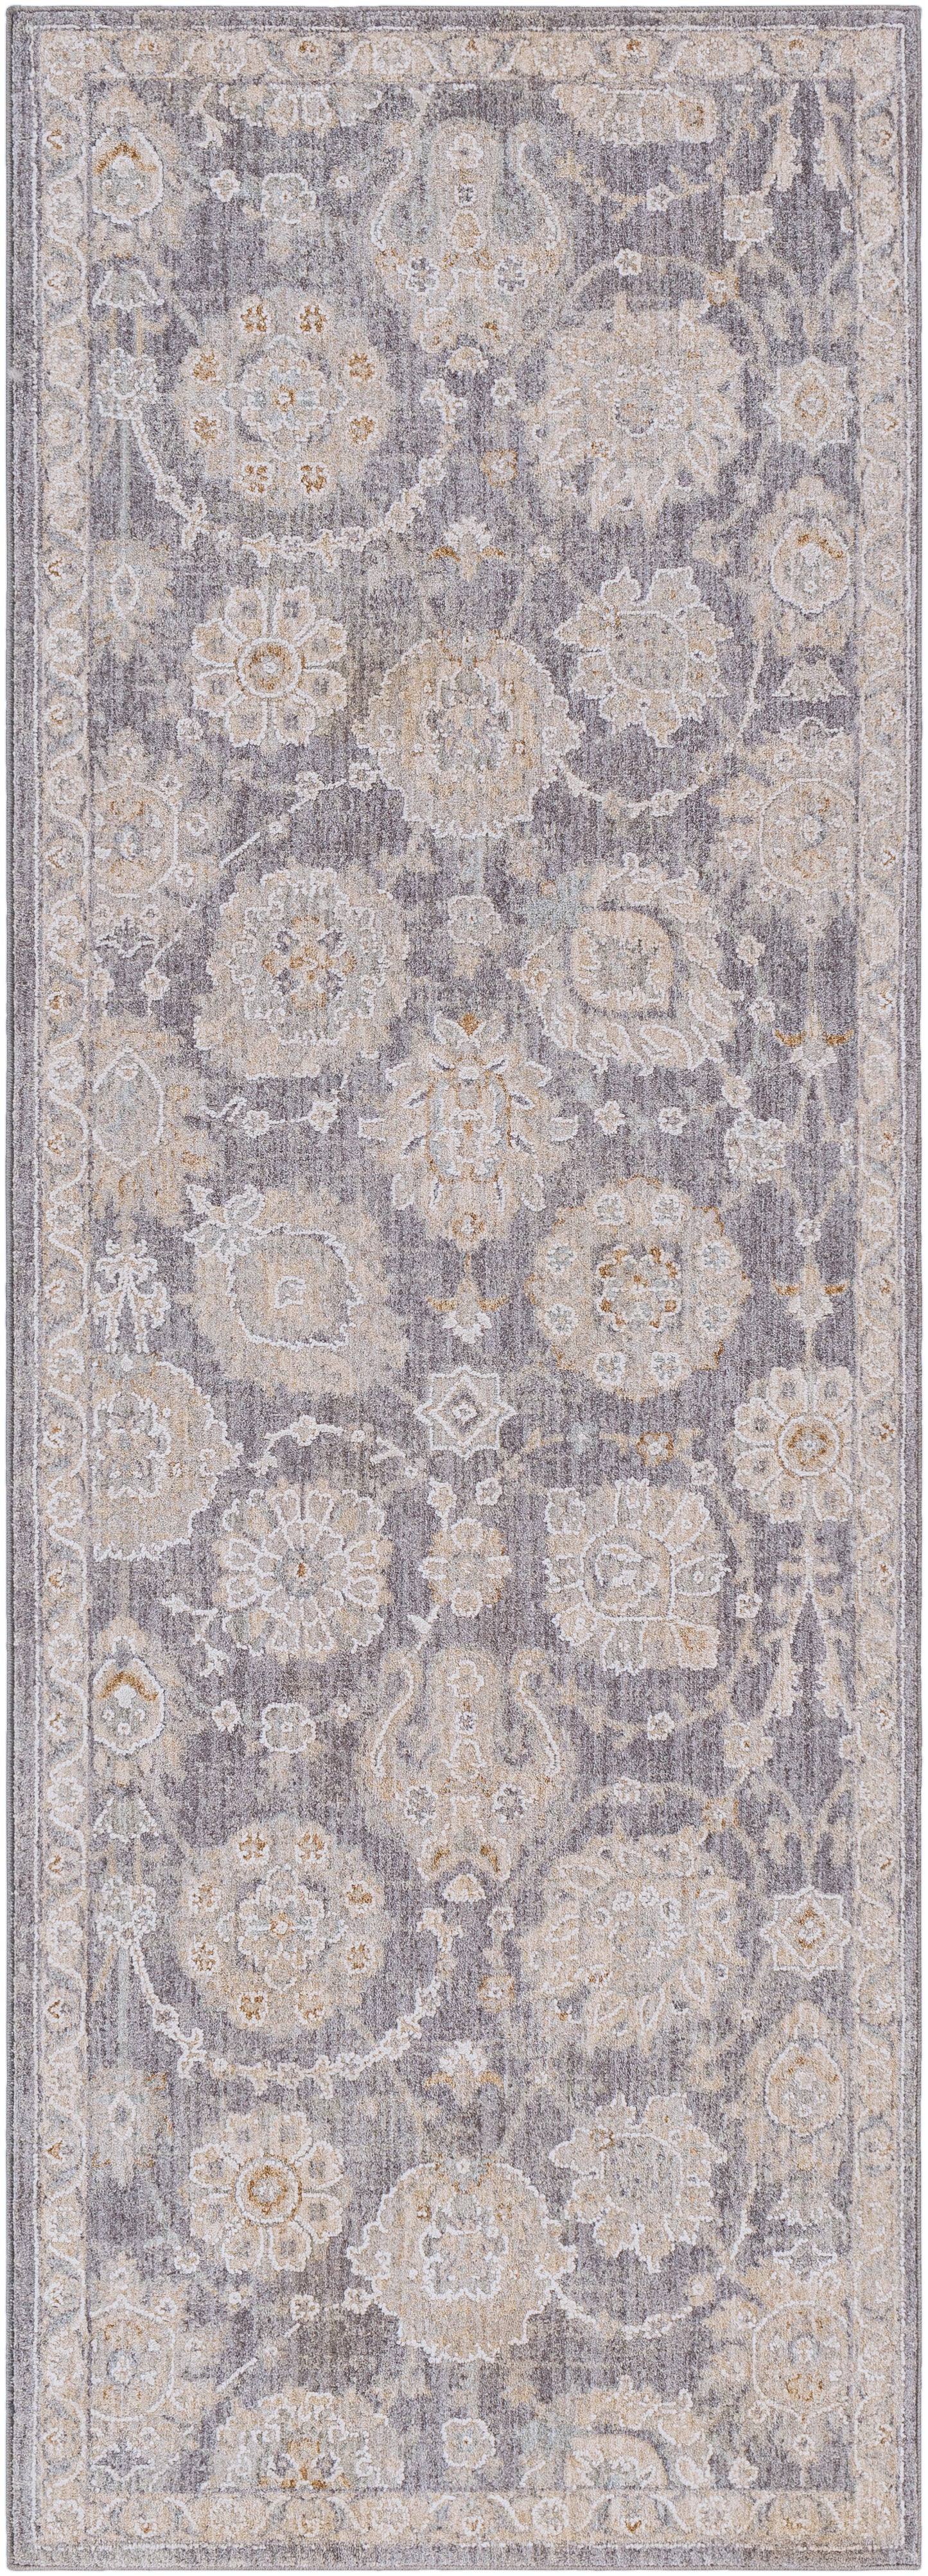 Avant Garde 30594 Machine Woven Synthetic Blend Indoor Area Rug by Surya Rugs